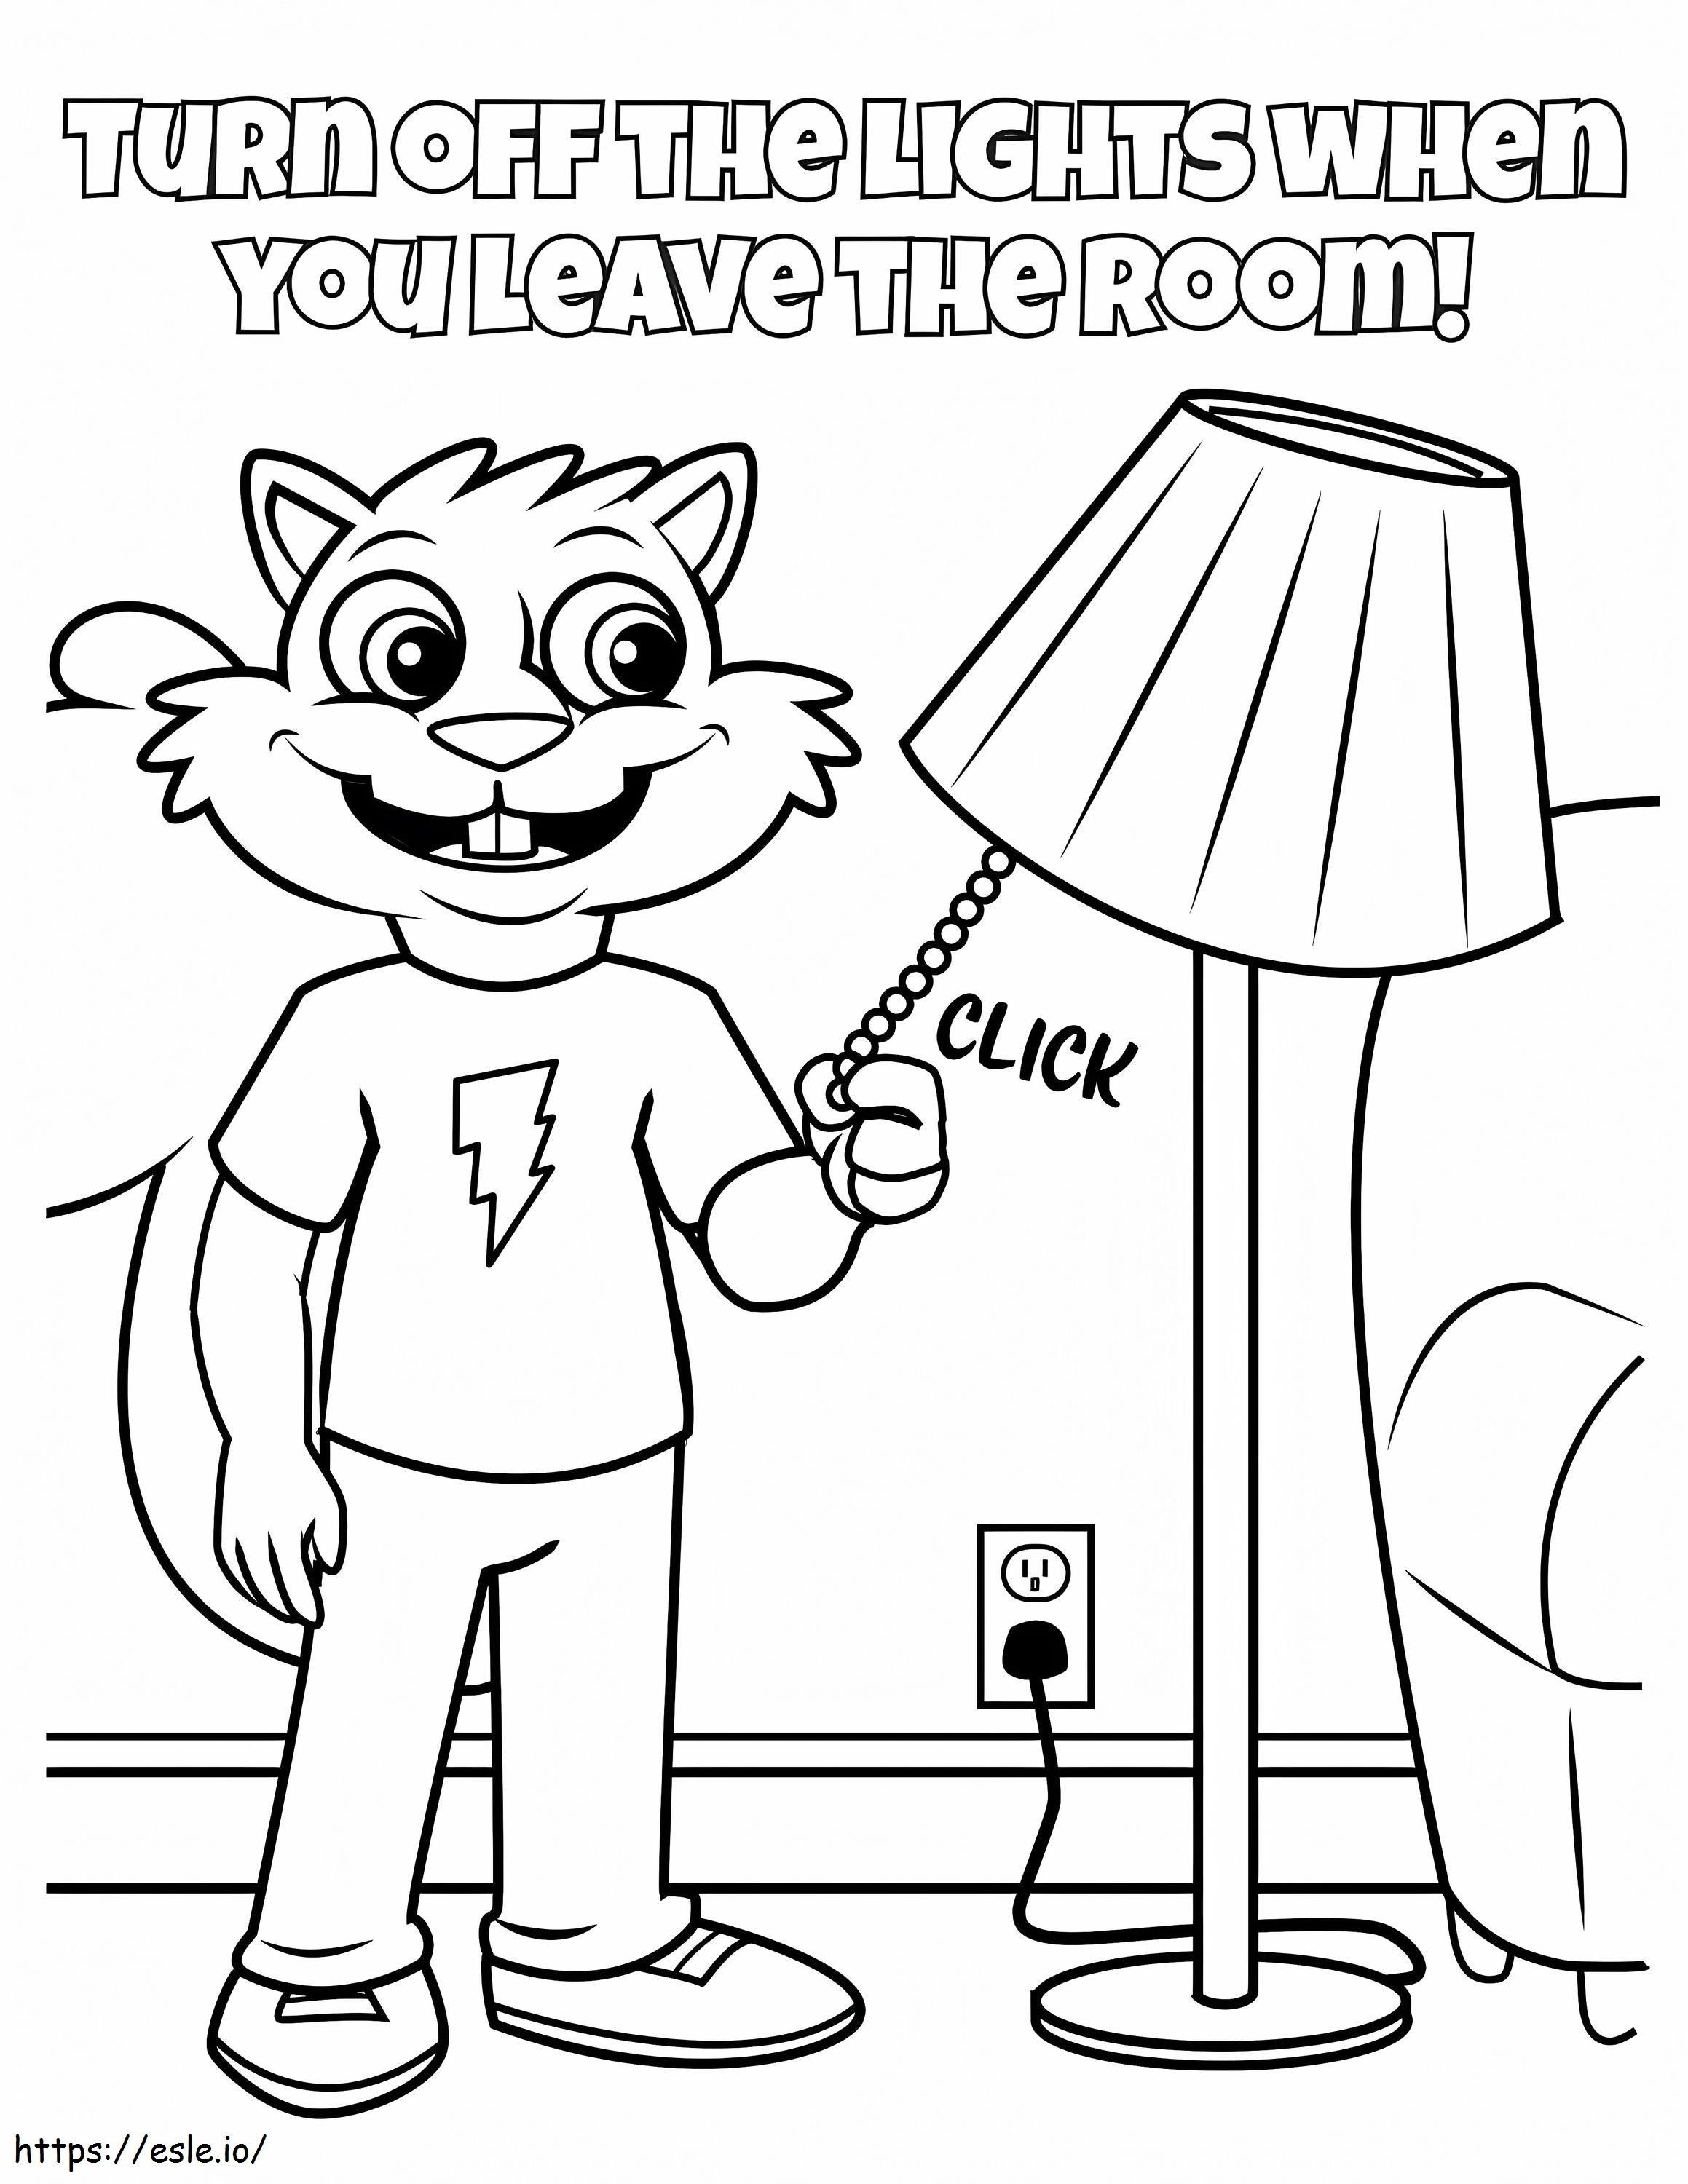 Turn Off The Lights coloring page